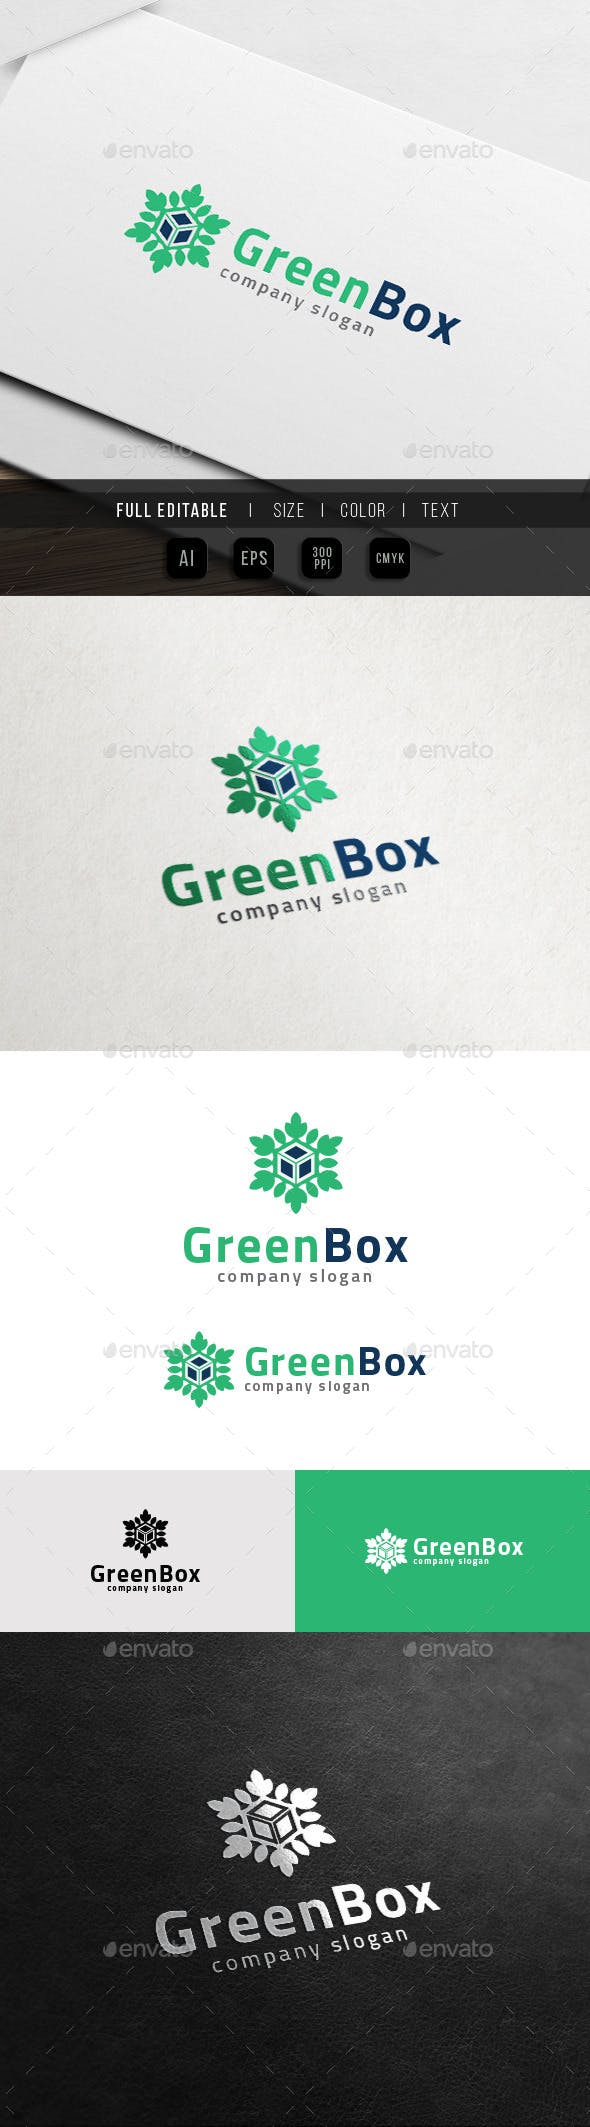 Company with Green Box Logo - Green Box - Eco leaf Cube Logo by yip87 | GraphicRiver